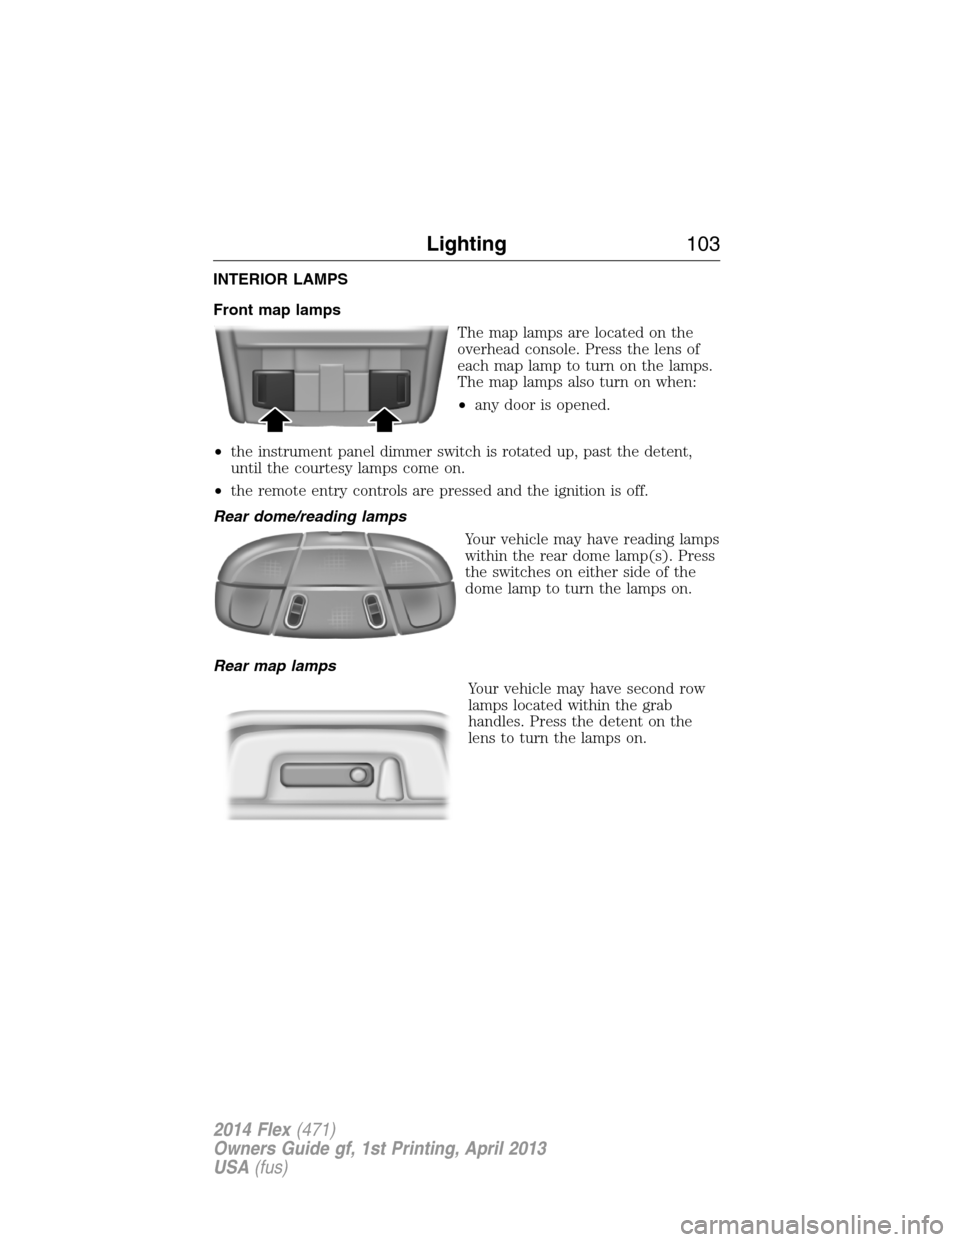 FORD FLEX 2014 1.G Owners Manual INTERIOR LAMPS
Front map lamps
The map lamps are located on the
overhead console. Press the lens of
each map lamp to turn on the lamps.
The map lamps also turn on when:
•any door is opened.
•the i